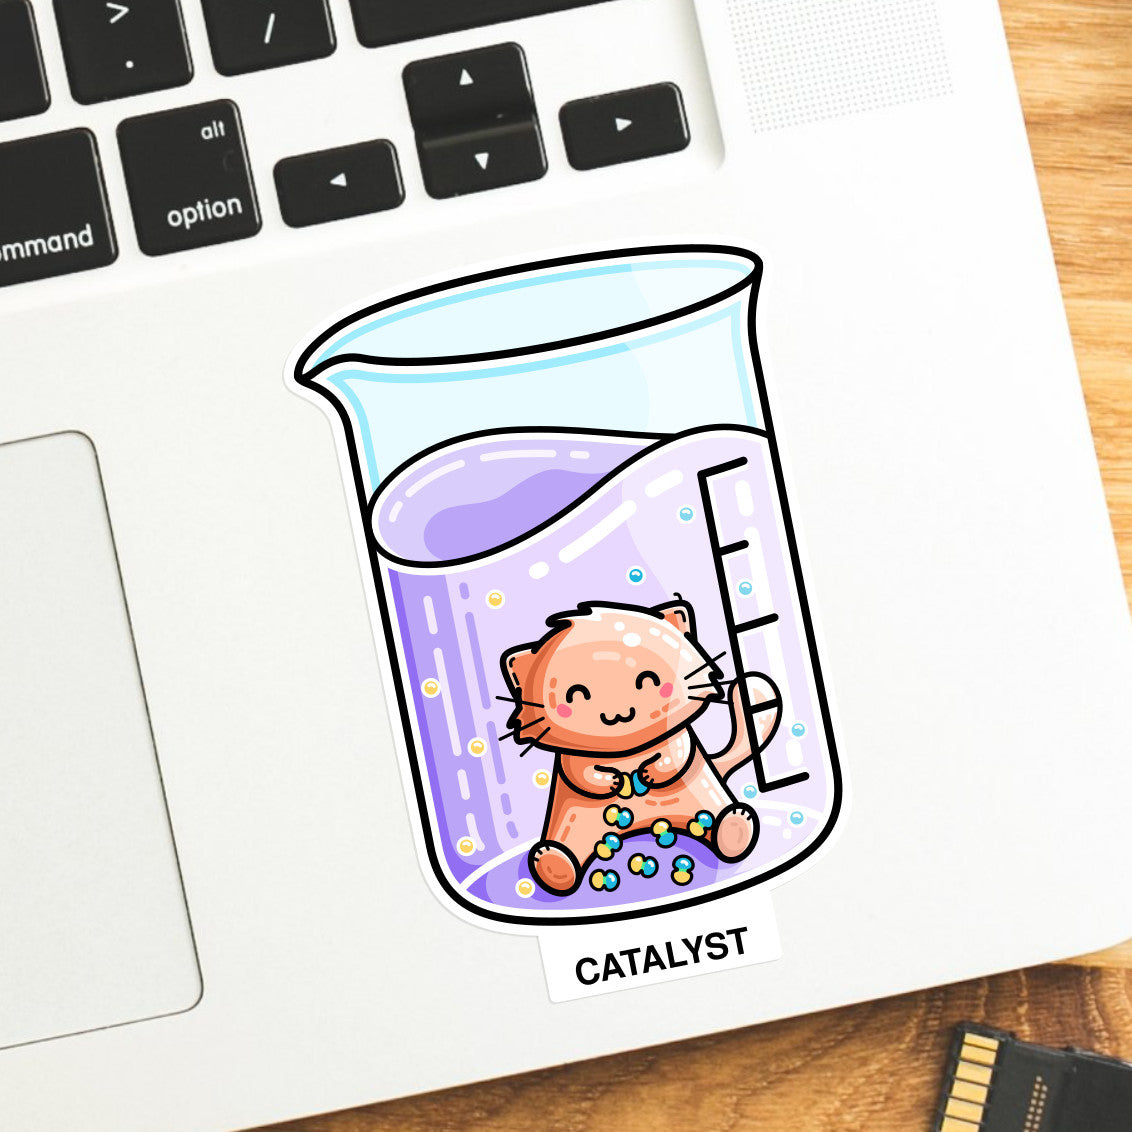 Vinyl sticker of a cute cat in a chemistry beaker joining atoms with the word catalyst, the sticker is on a laptop computer keyboard